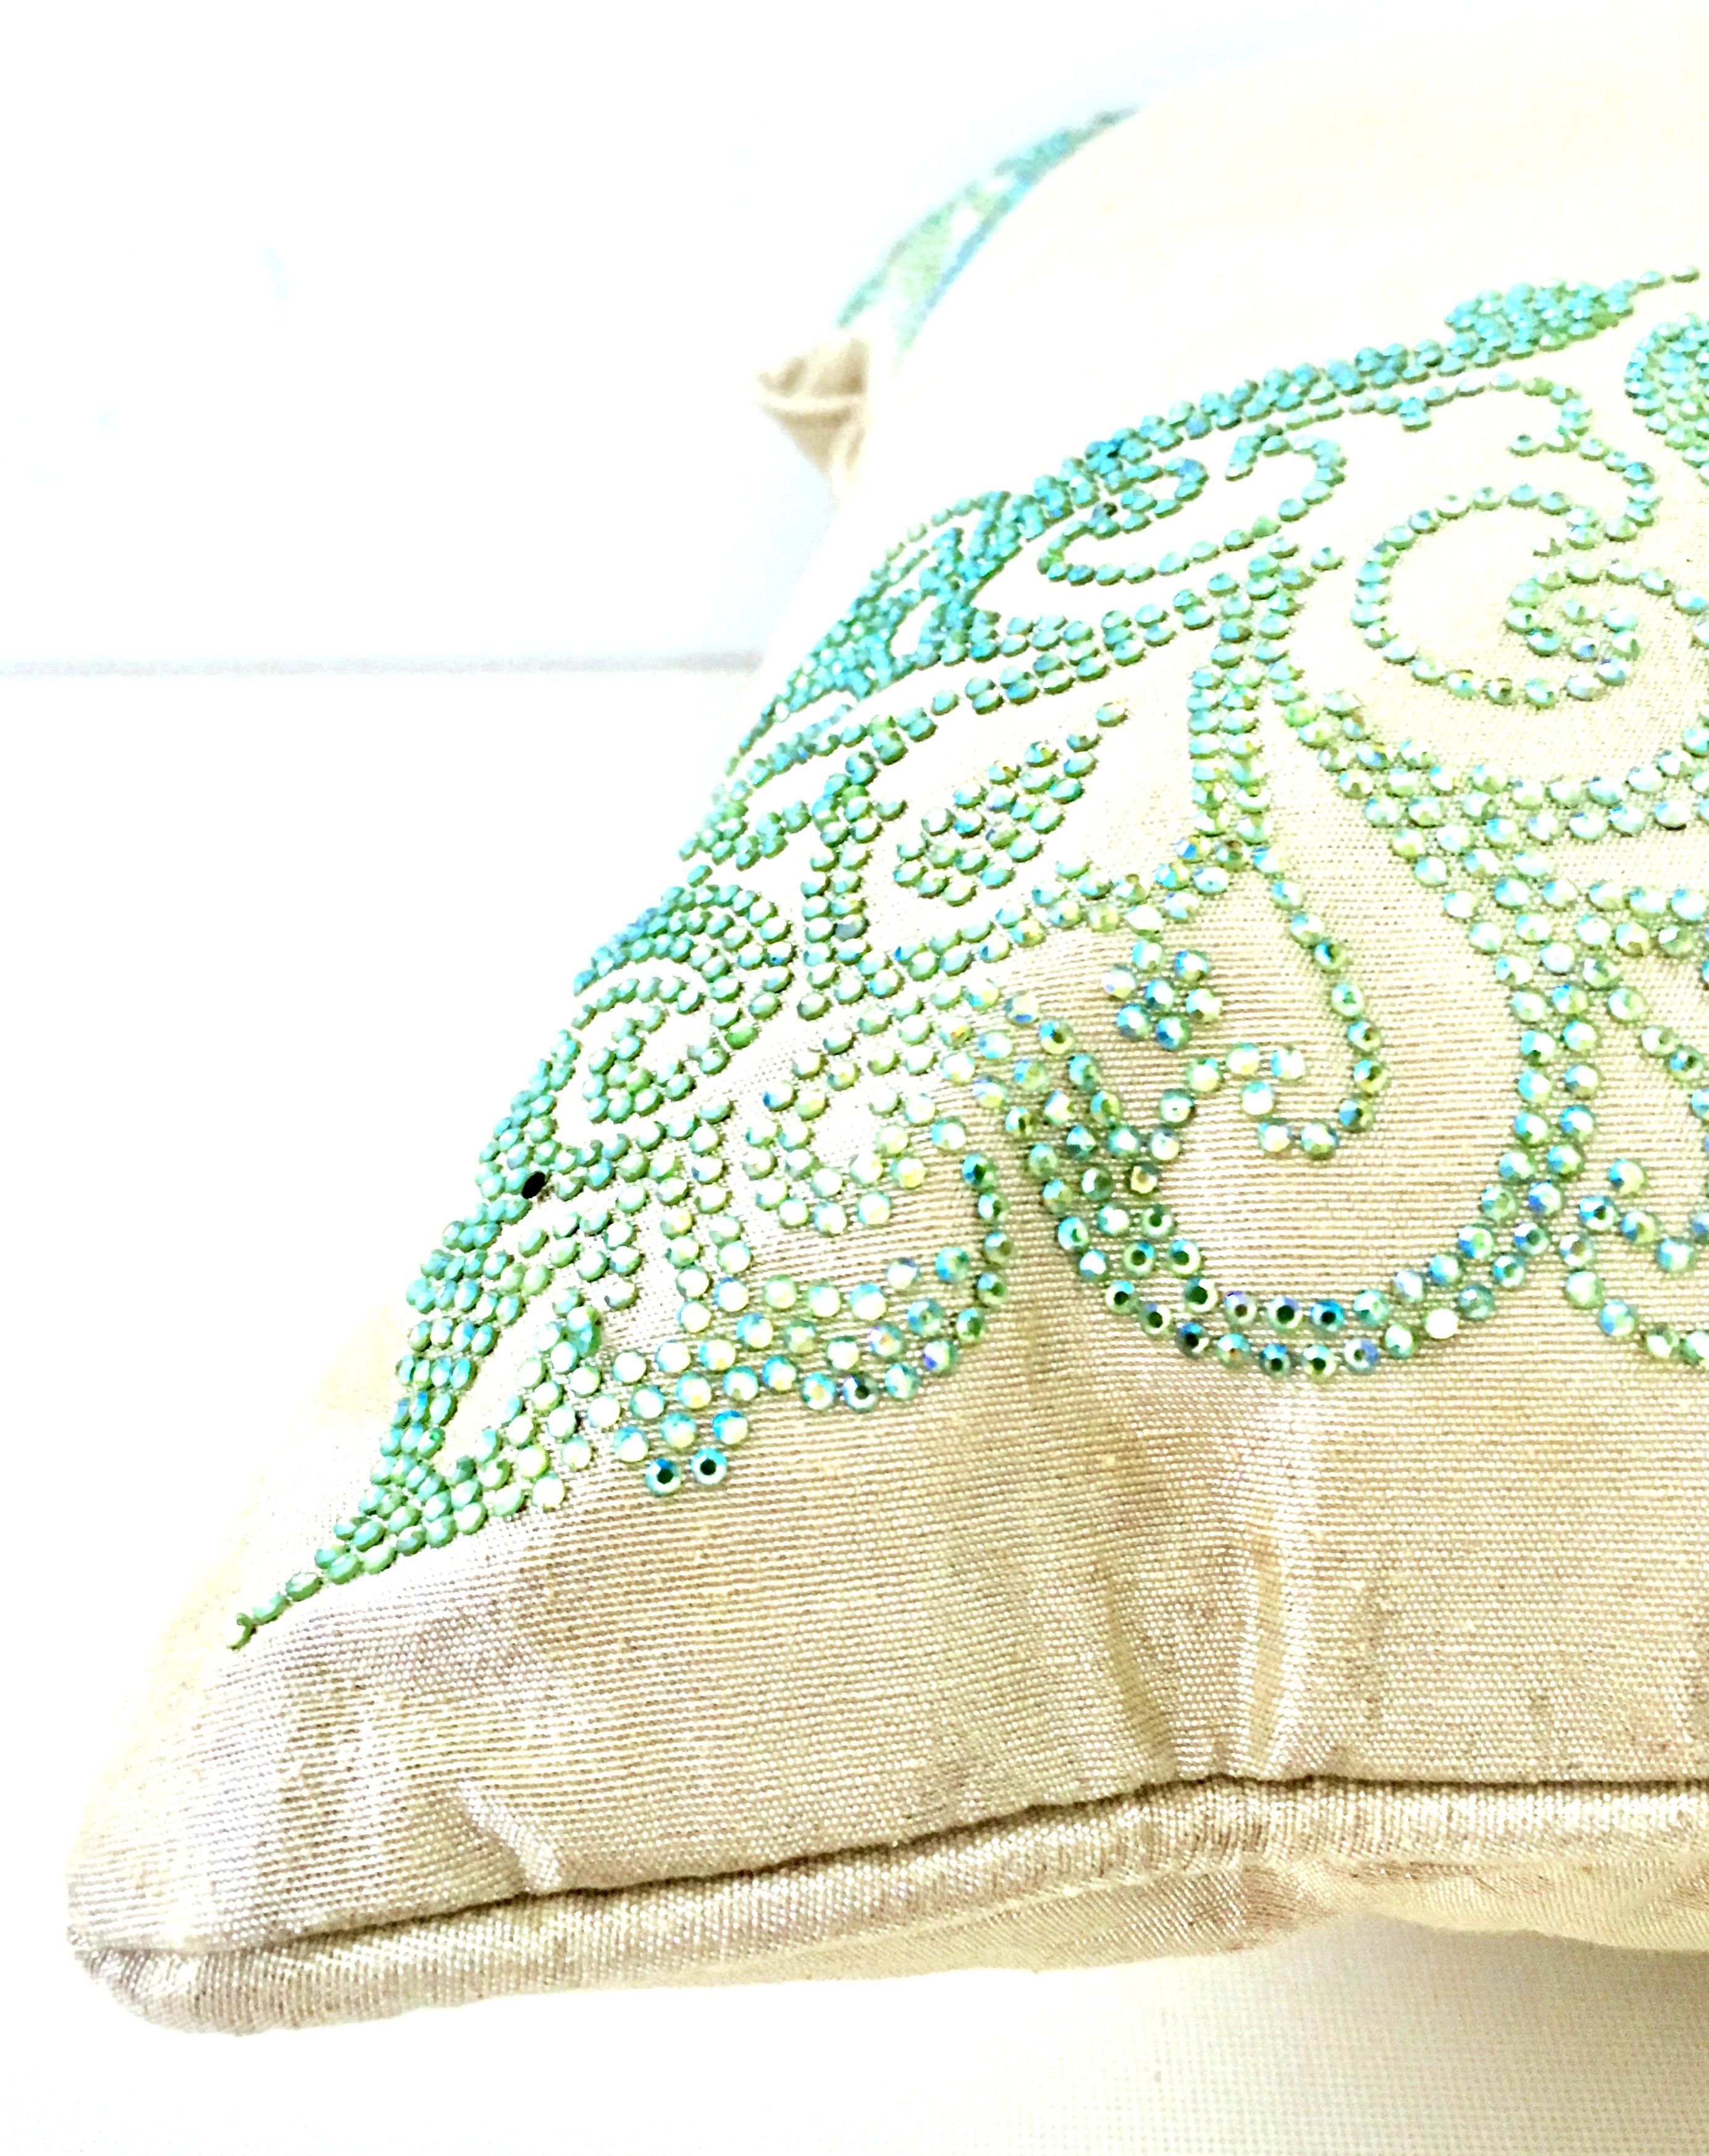 Contemporary 21st Century and New Silk Paisley Crystal Adorned Down Filled Pillow by, Sivaana